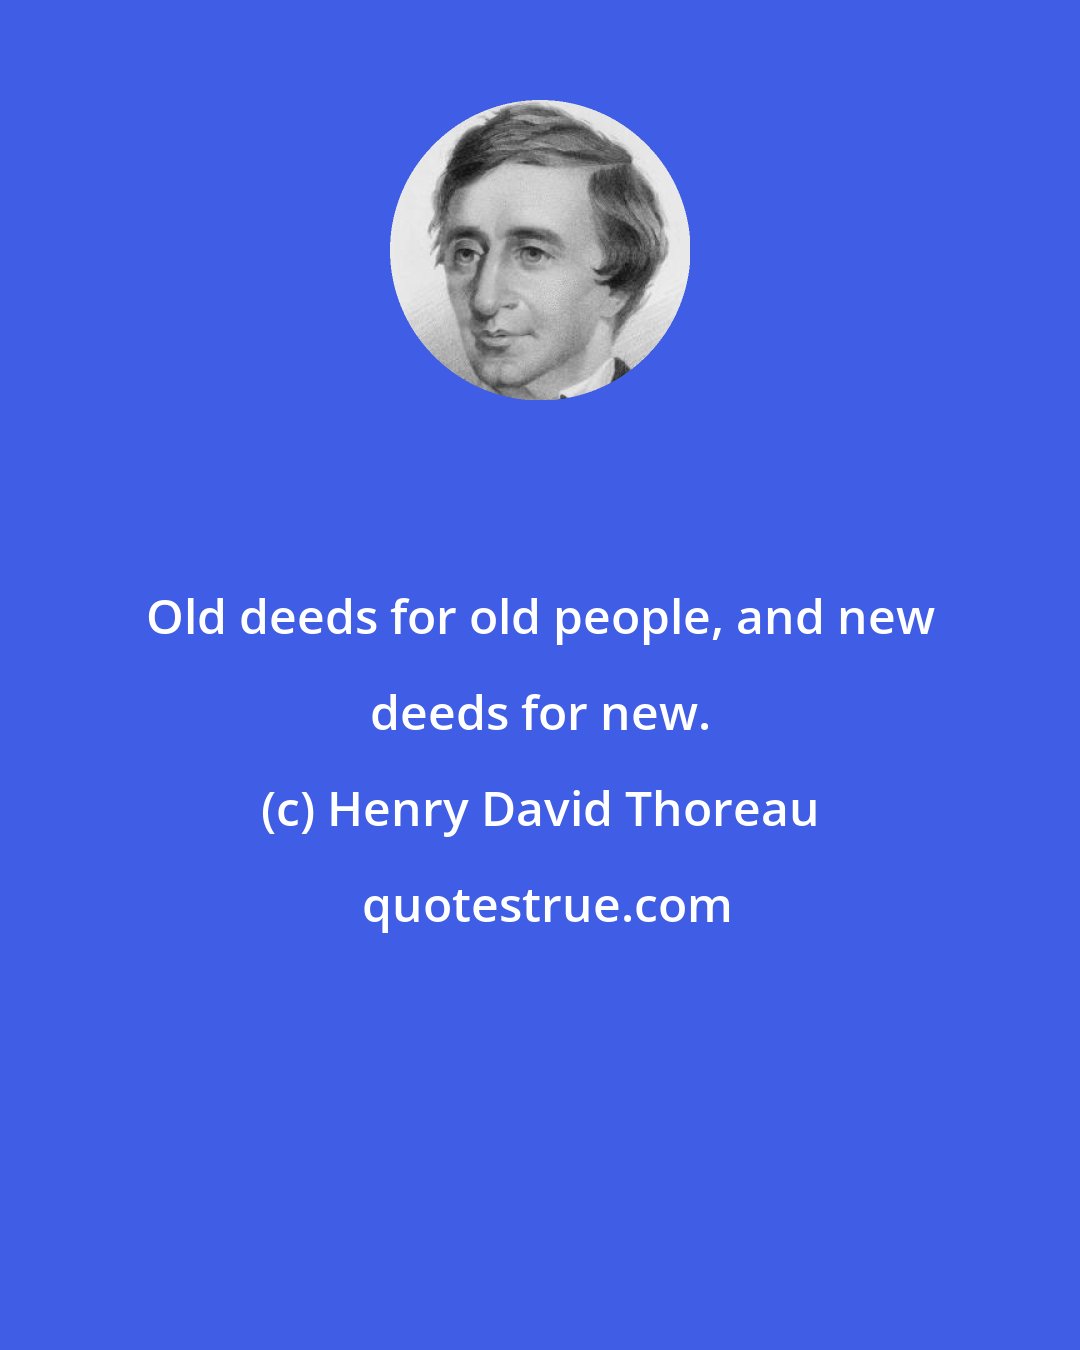 Henry David Thoreau: Old deeds for old people, and new deeds for new.